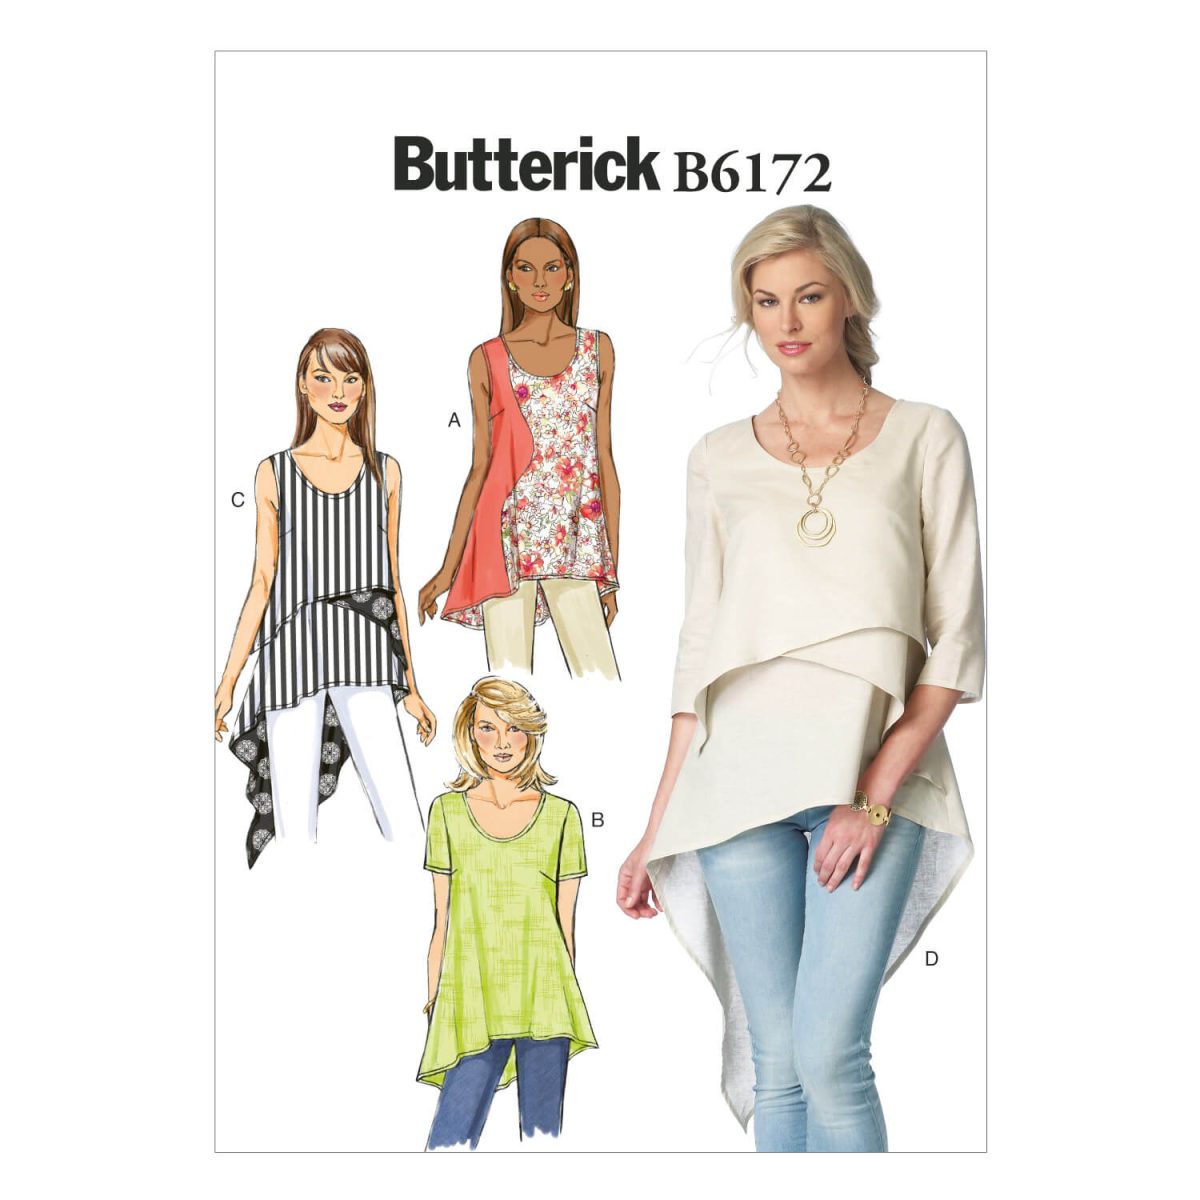 Butterick Sewing Pattern B6172 Misses’ Top and Tunic - Sewdirect